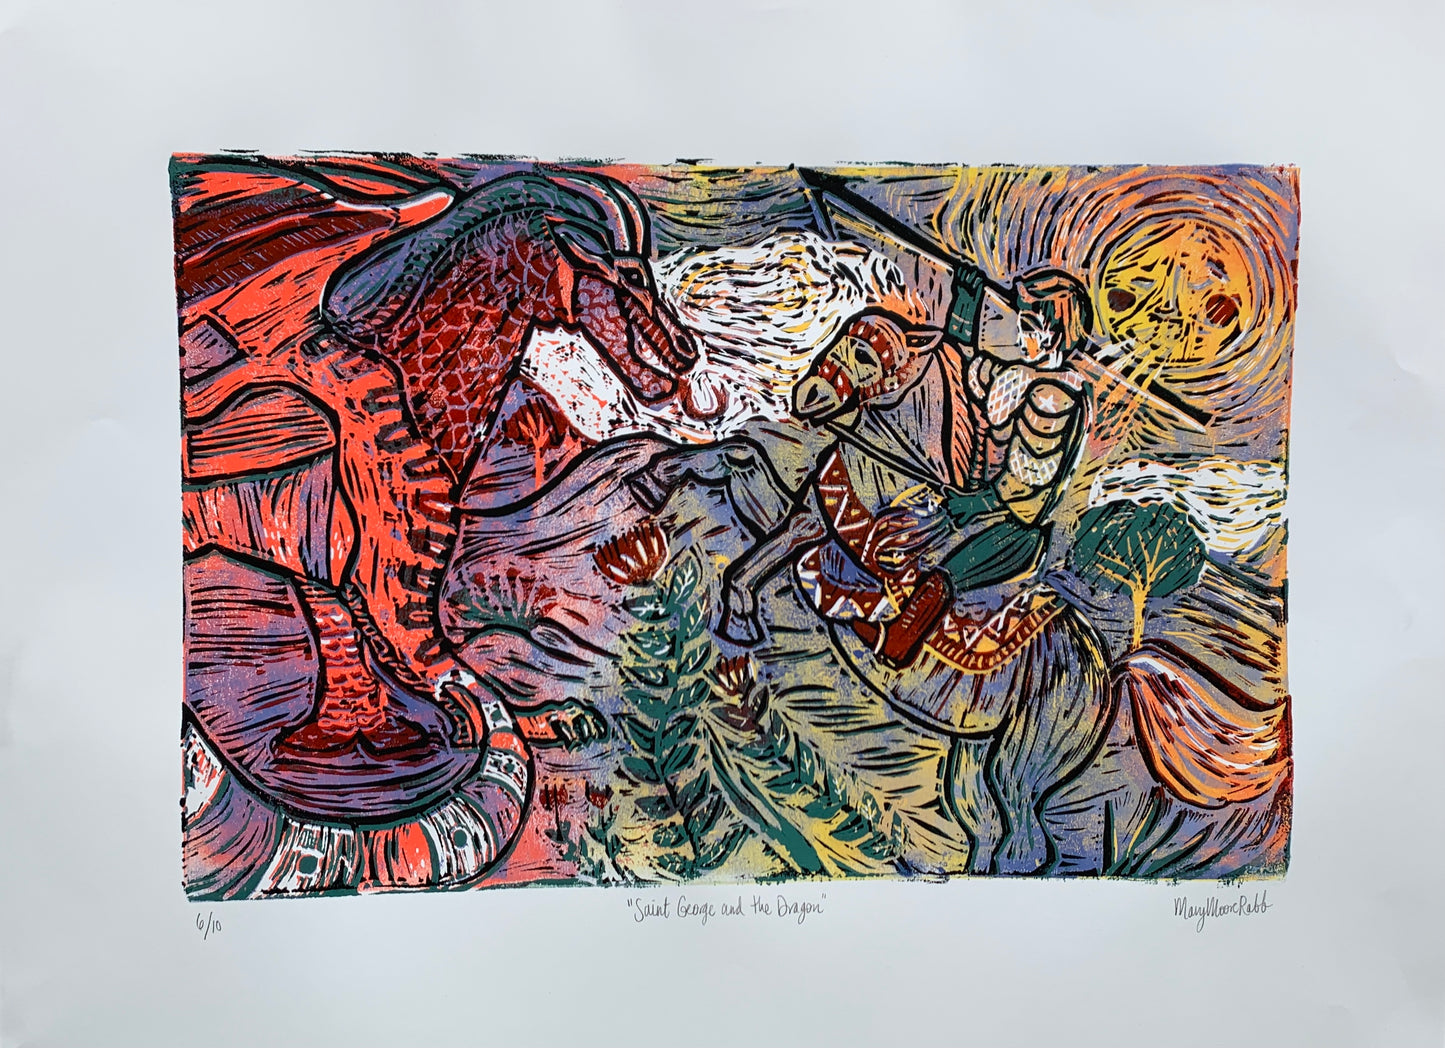 "St George and the Dragon" Reduction linocut, edition 10, size 18” x 24”. 2021